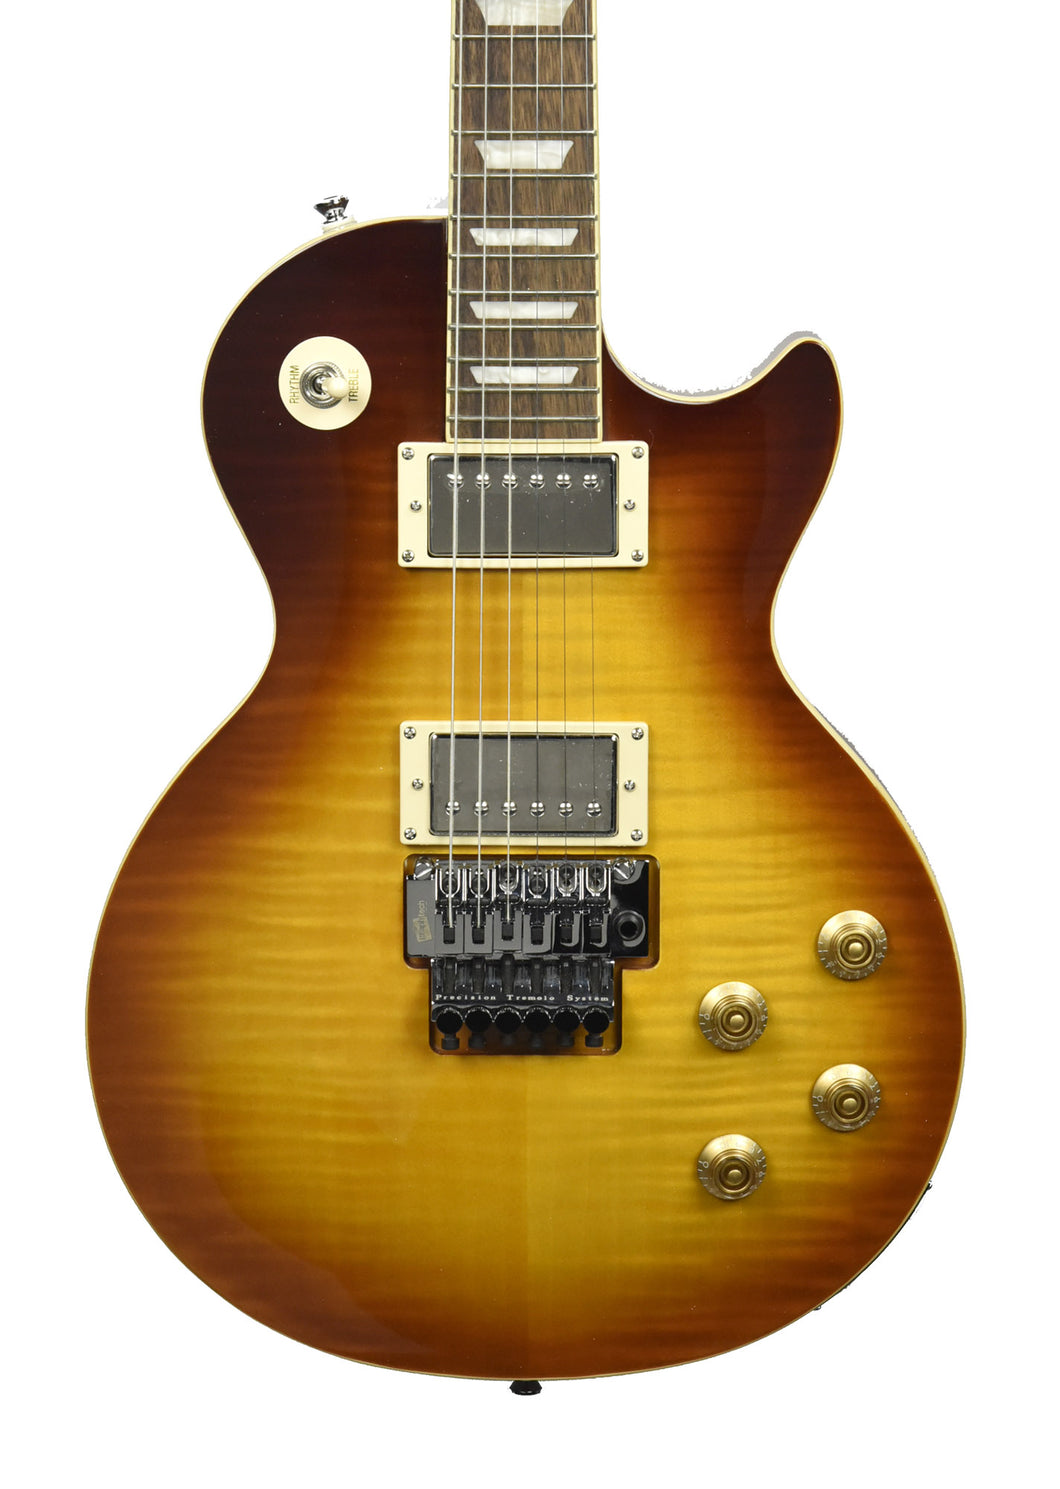 Epiphone Alex Lifeson Les Paul Standard Axcess in Viceroy Brown 20071522067 - The Music Gallery